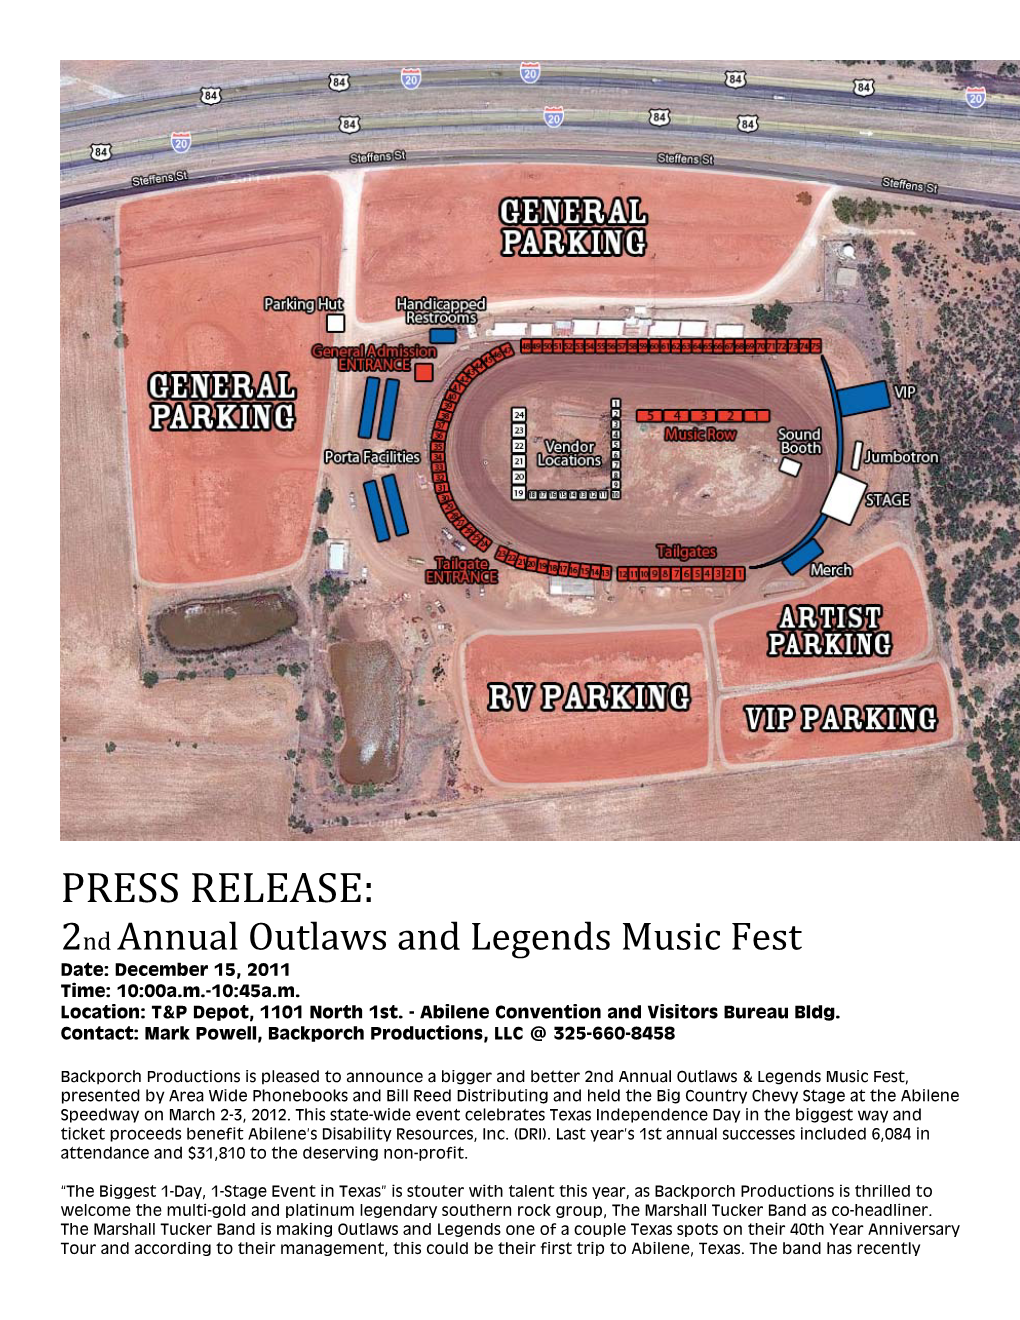 PRESS RELEASE: 2Nd Annual Outlaws and Legends Music Fest Date: December 15, 2011 Time: 10:00A.M.-10:45A.M